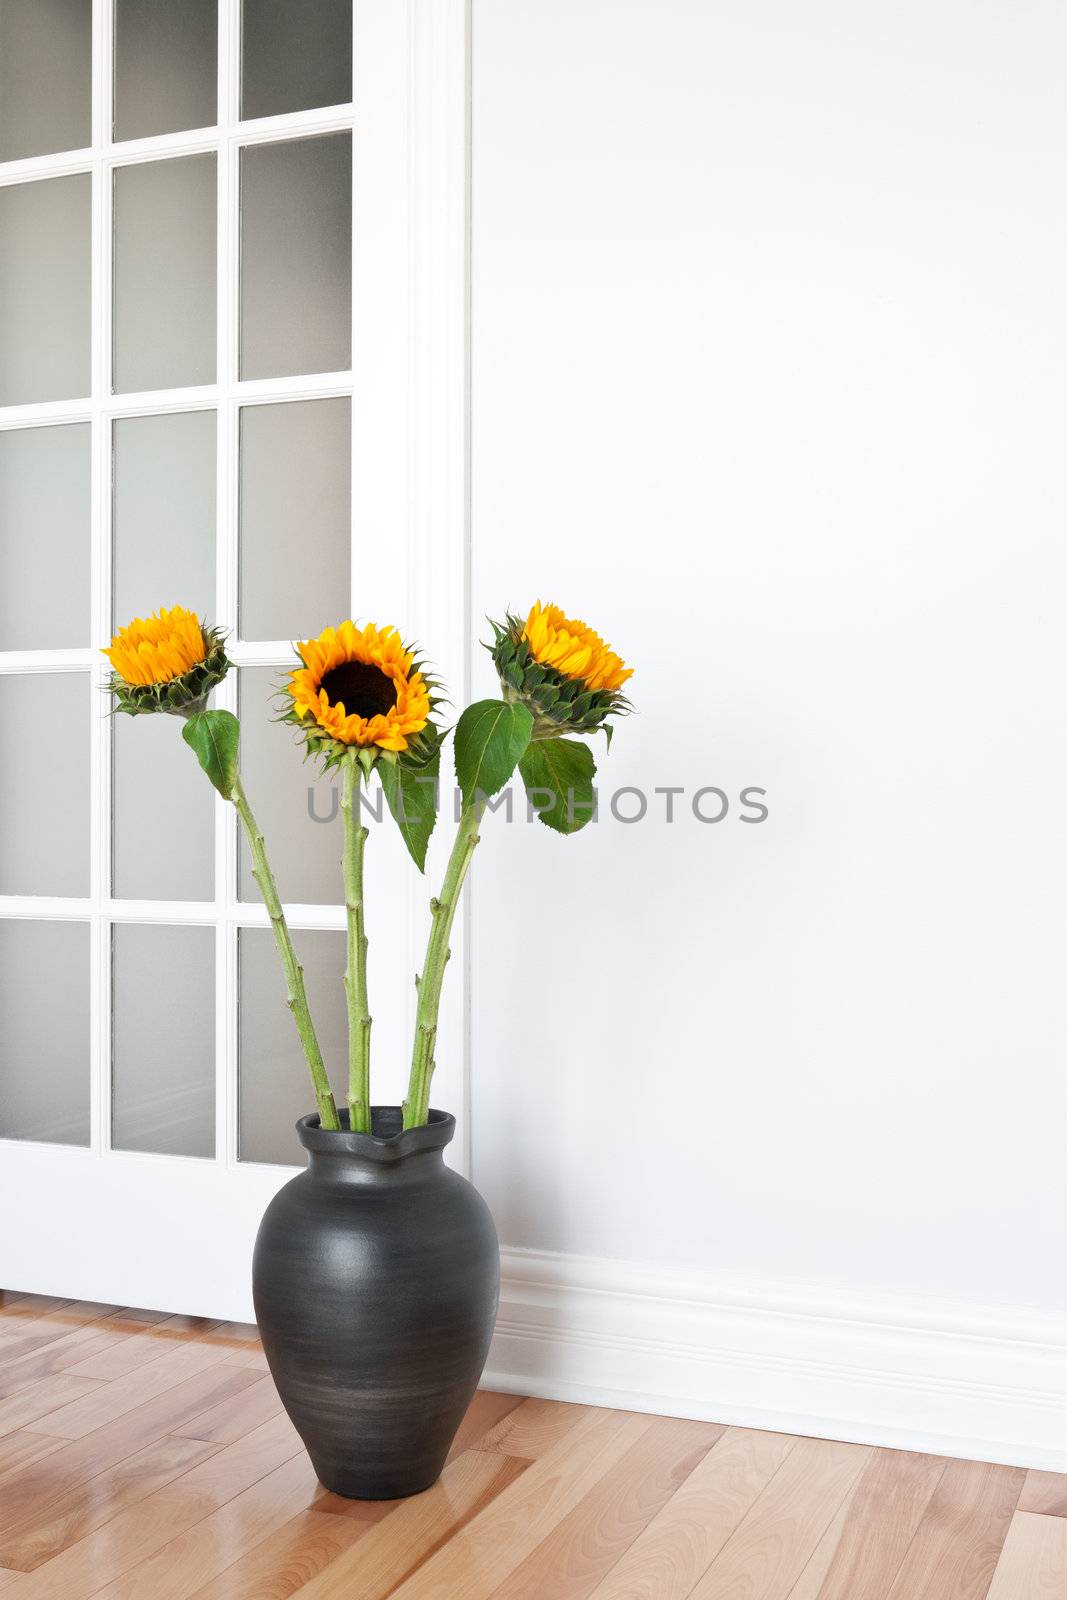 Bright sunflowers decorating a contemporary room.